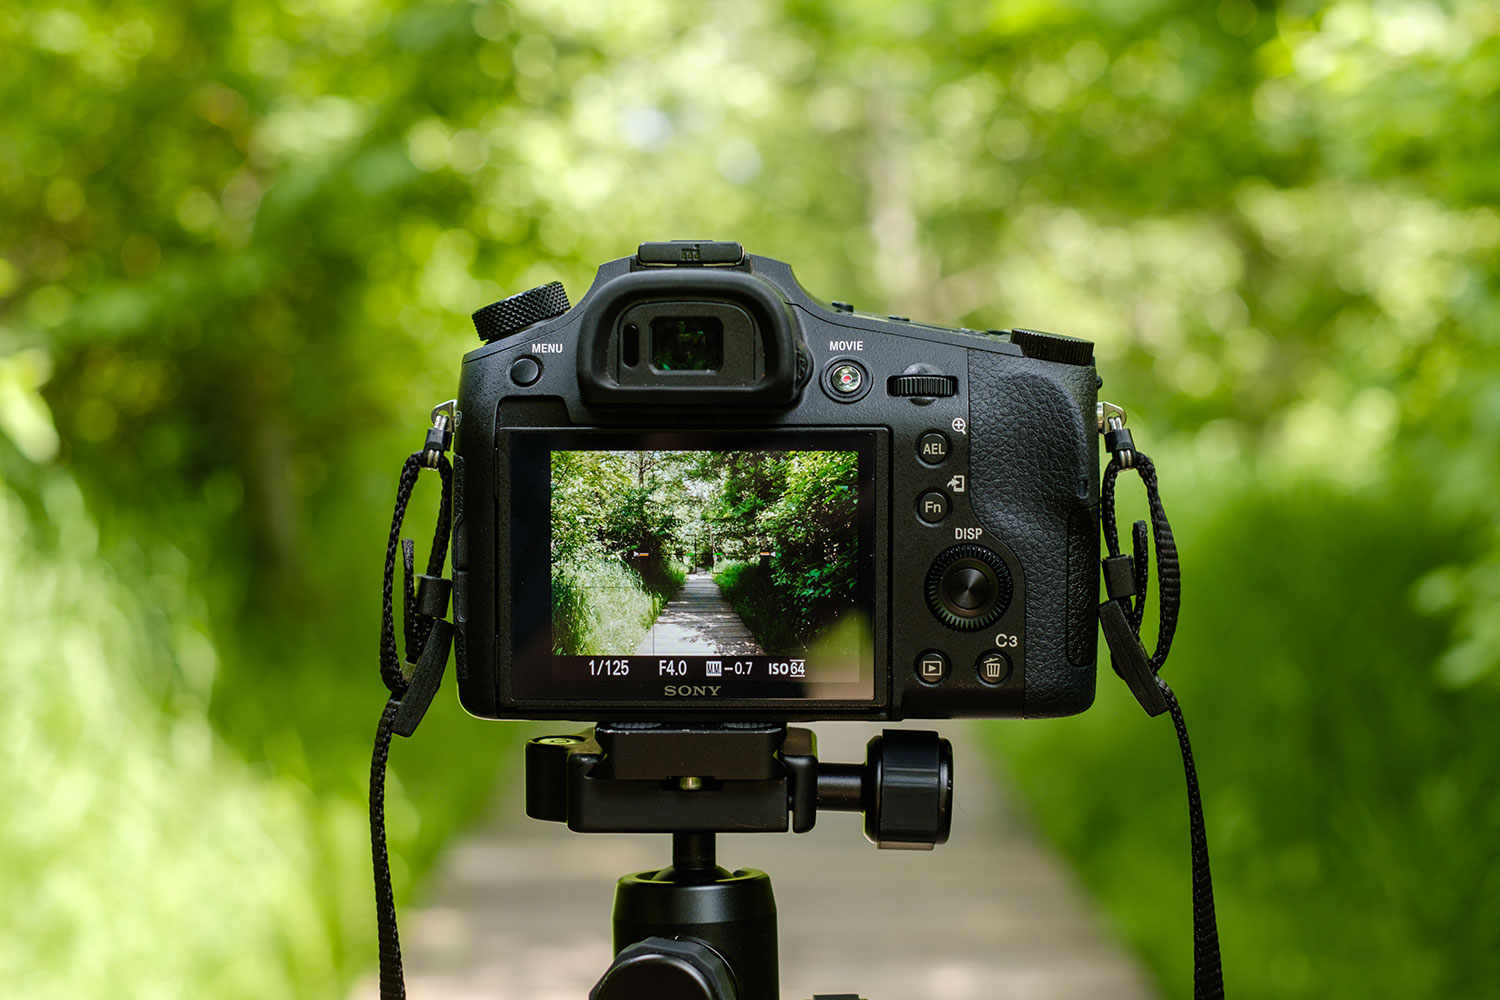 Sony RX10 IV Review: Best Bridge Camera for Wildlife Photography